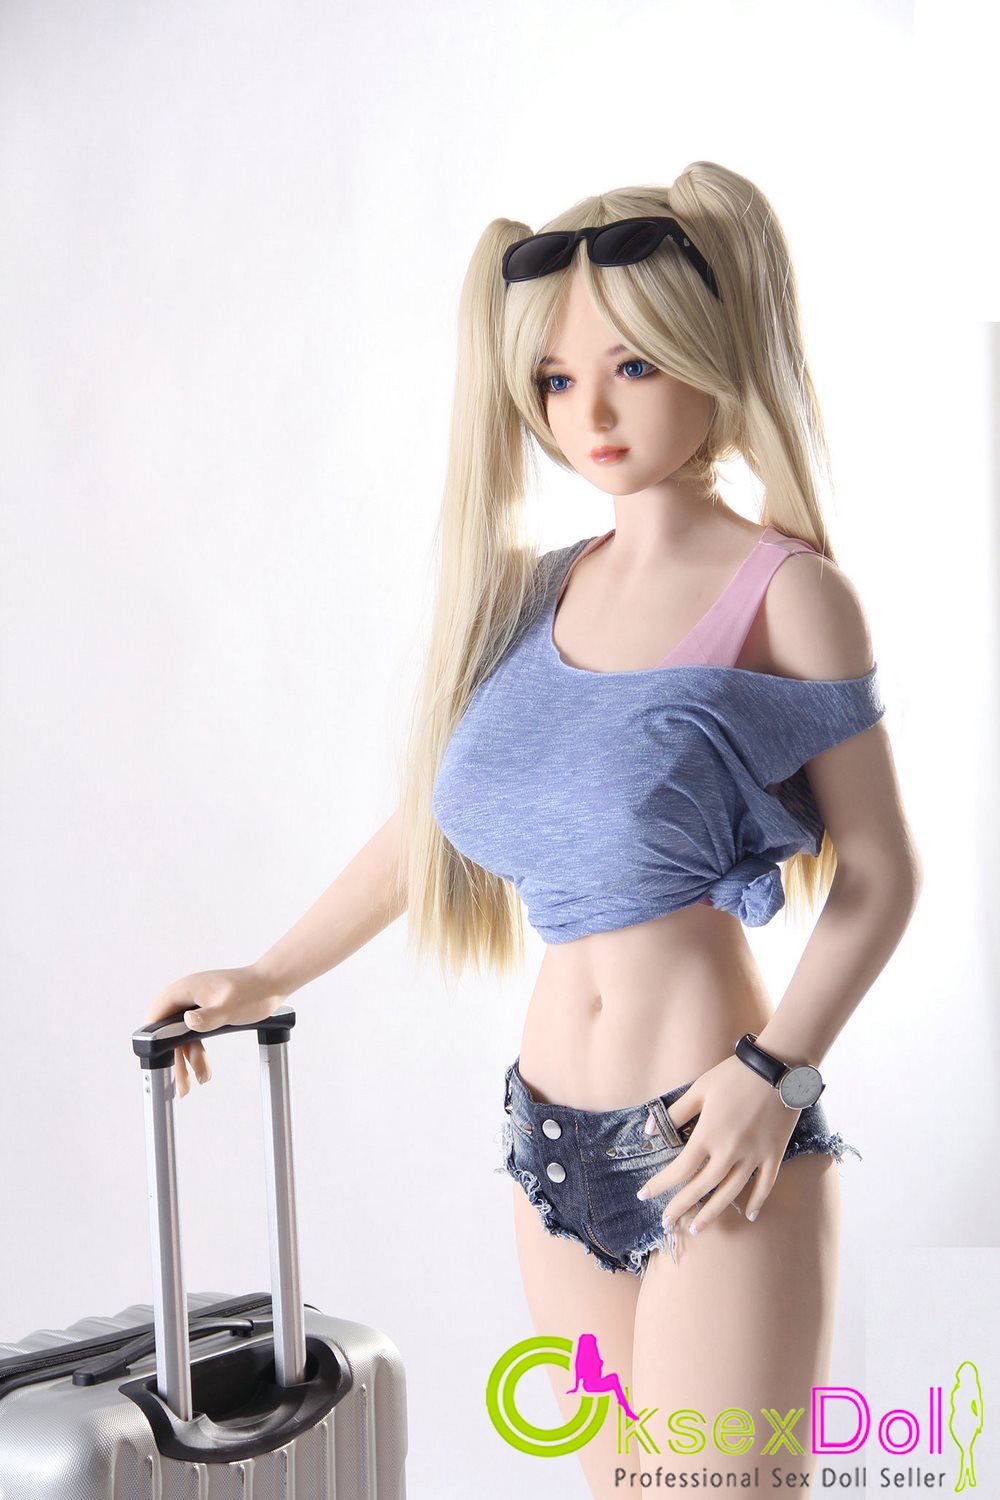 Blue Eyes love dolls Pictures